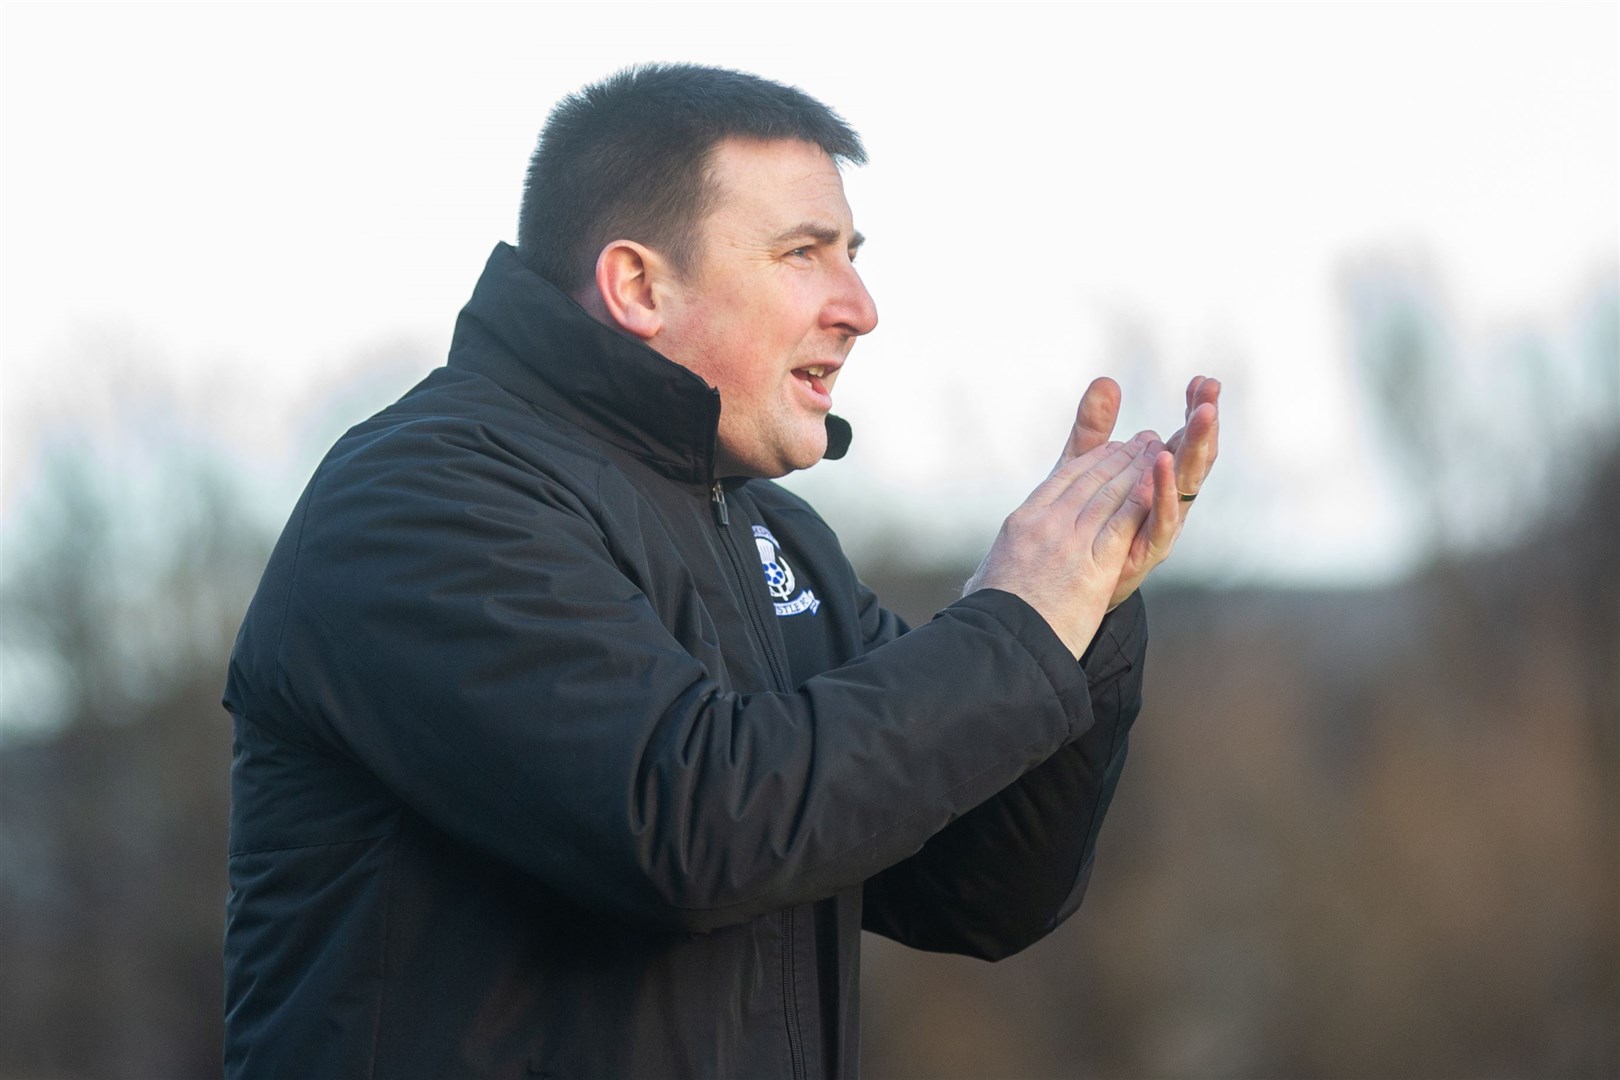 Strathspey Thistle manager Gordon Nicolson has welcomed confirmation by league bosses last night. Picture: Daniel Forsyth.